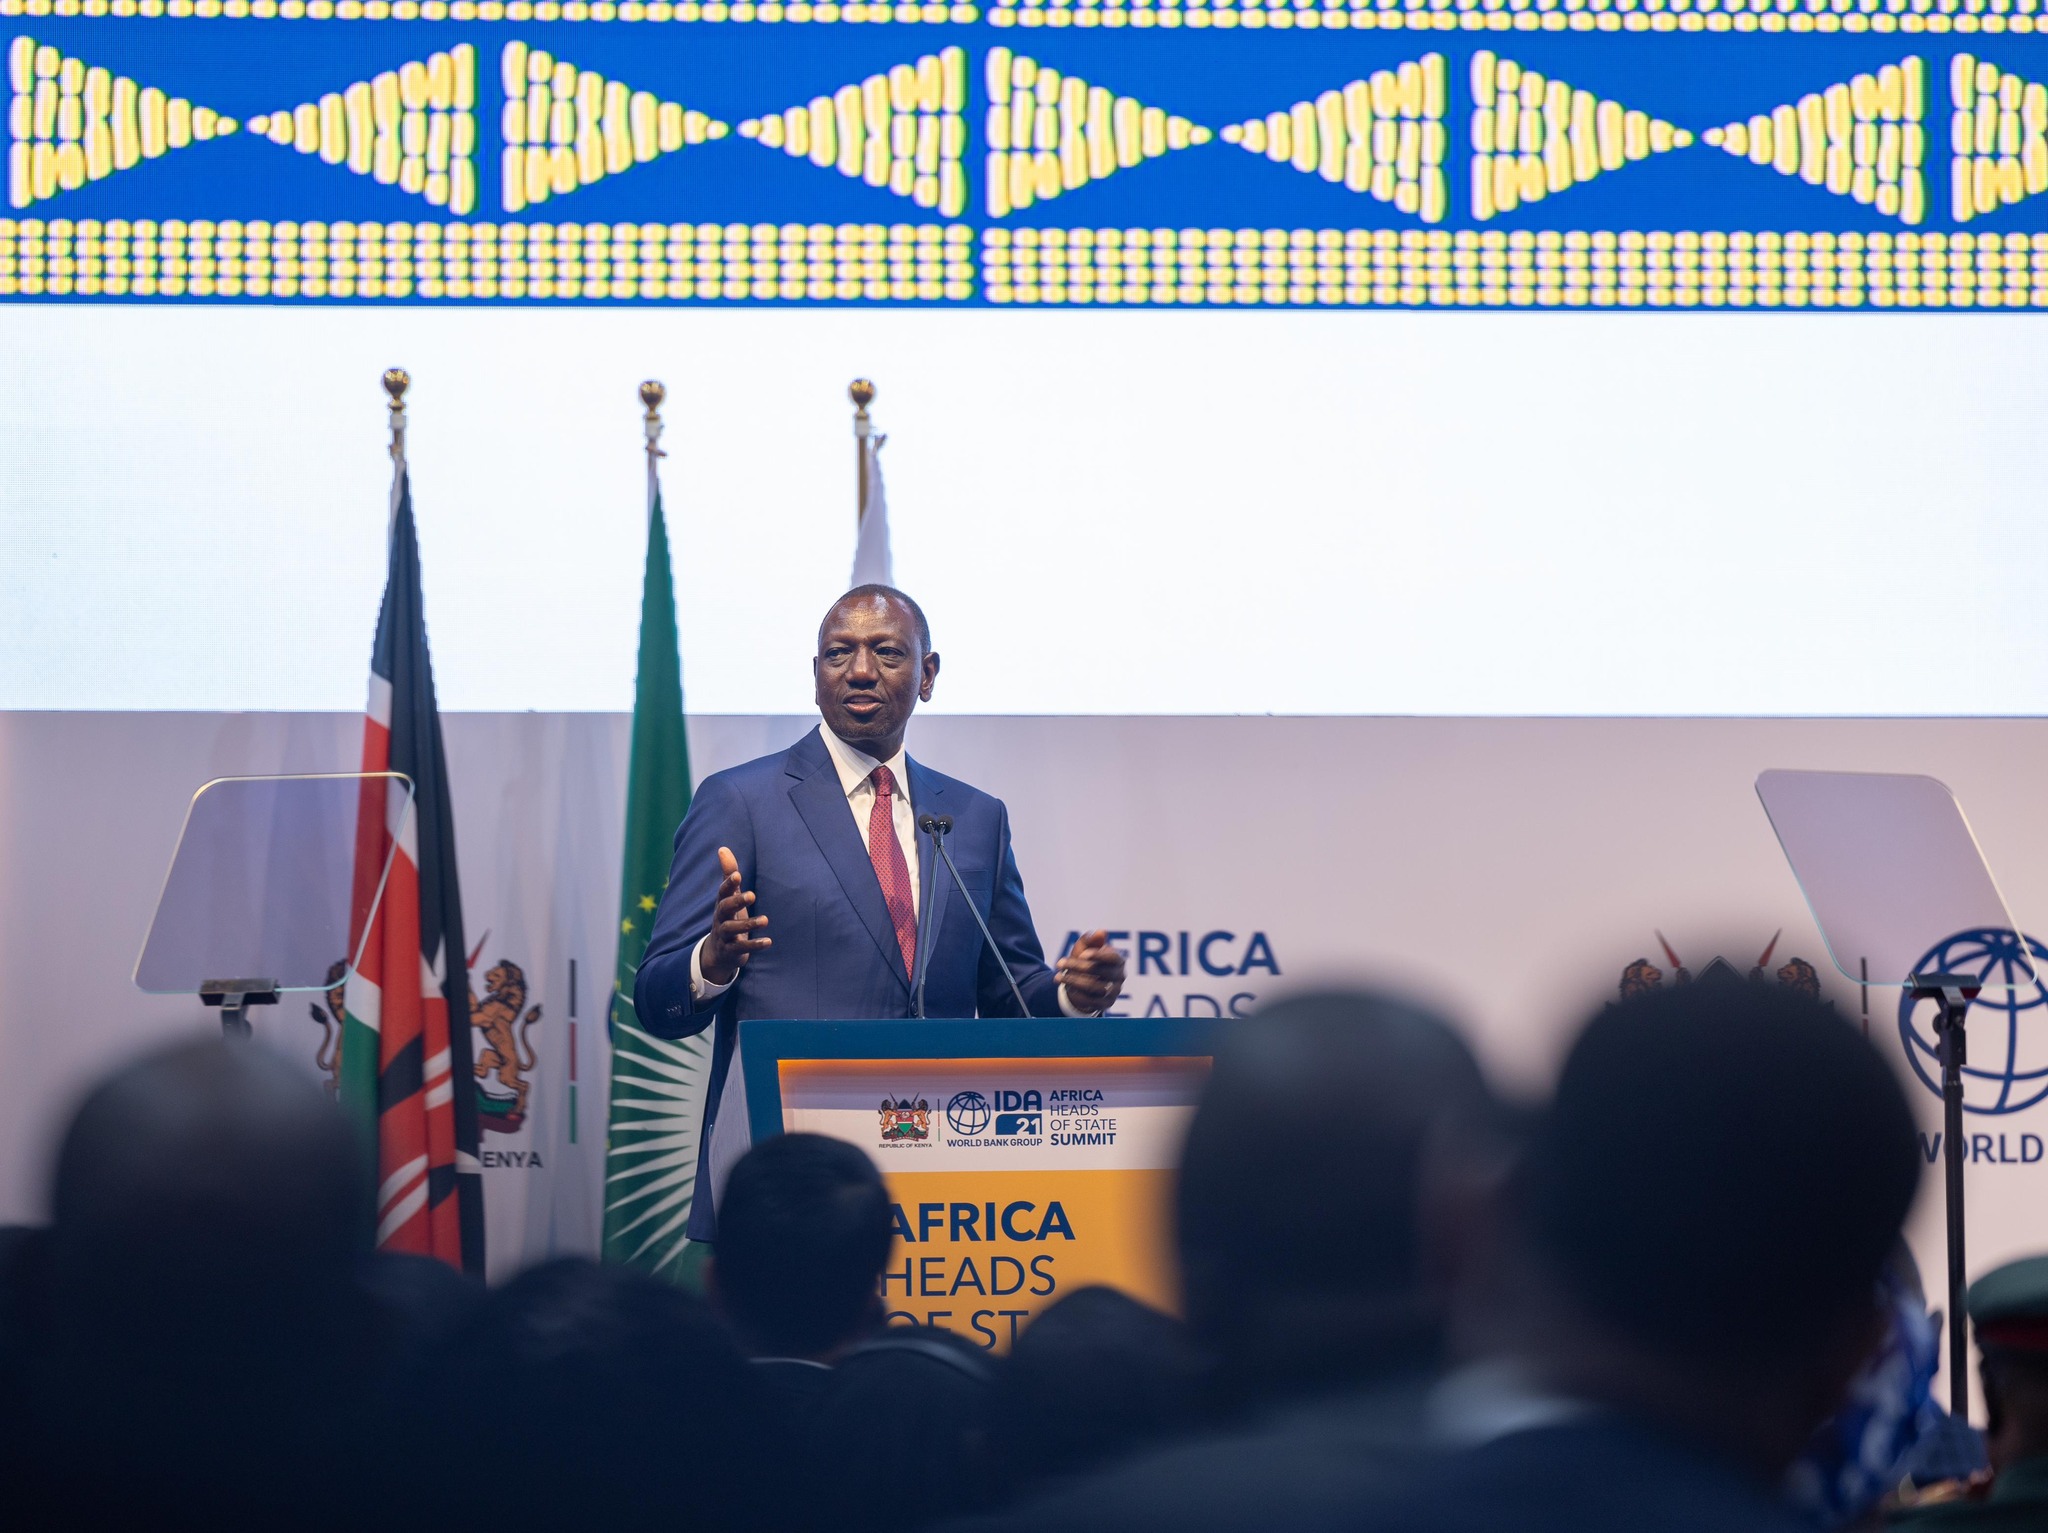 President Ruto Calls for Increased Partnerships to Drive Africa’s Progress